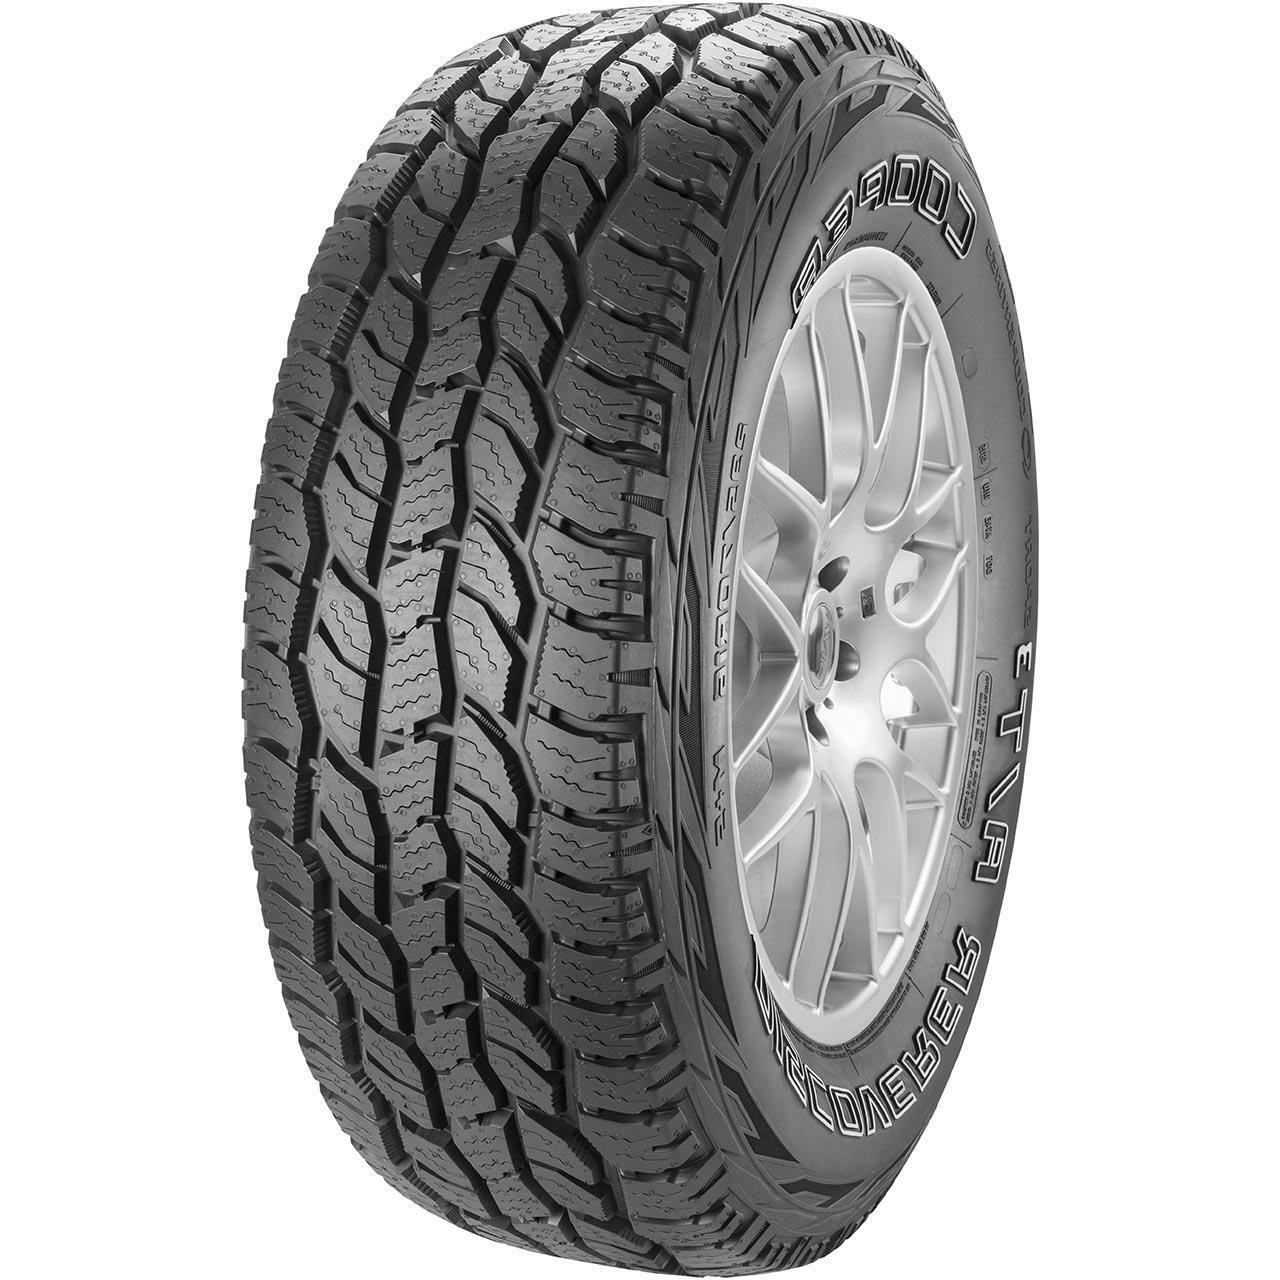 245/65 R17 111T XL DISCOVERER AT3 SPORT OWL CP